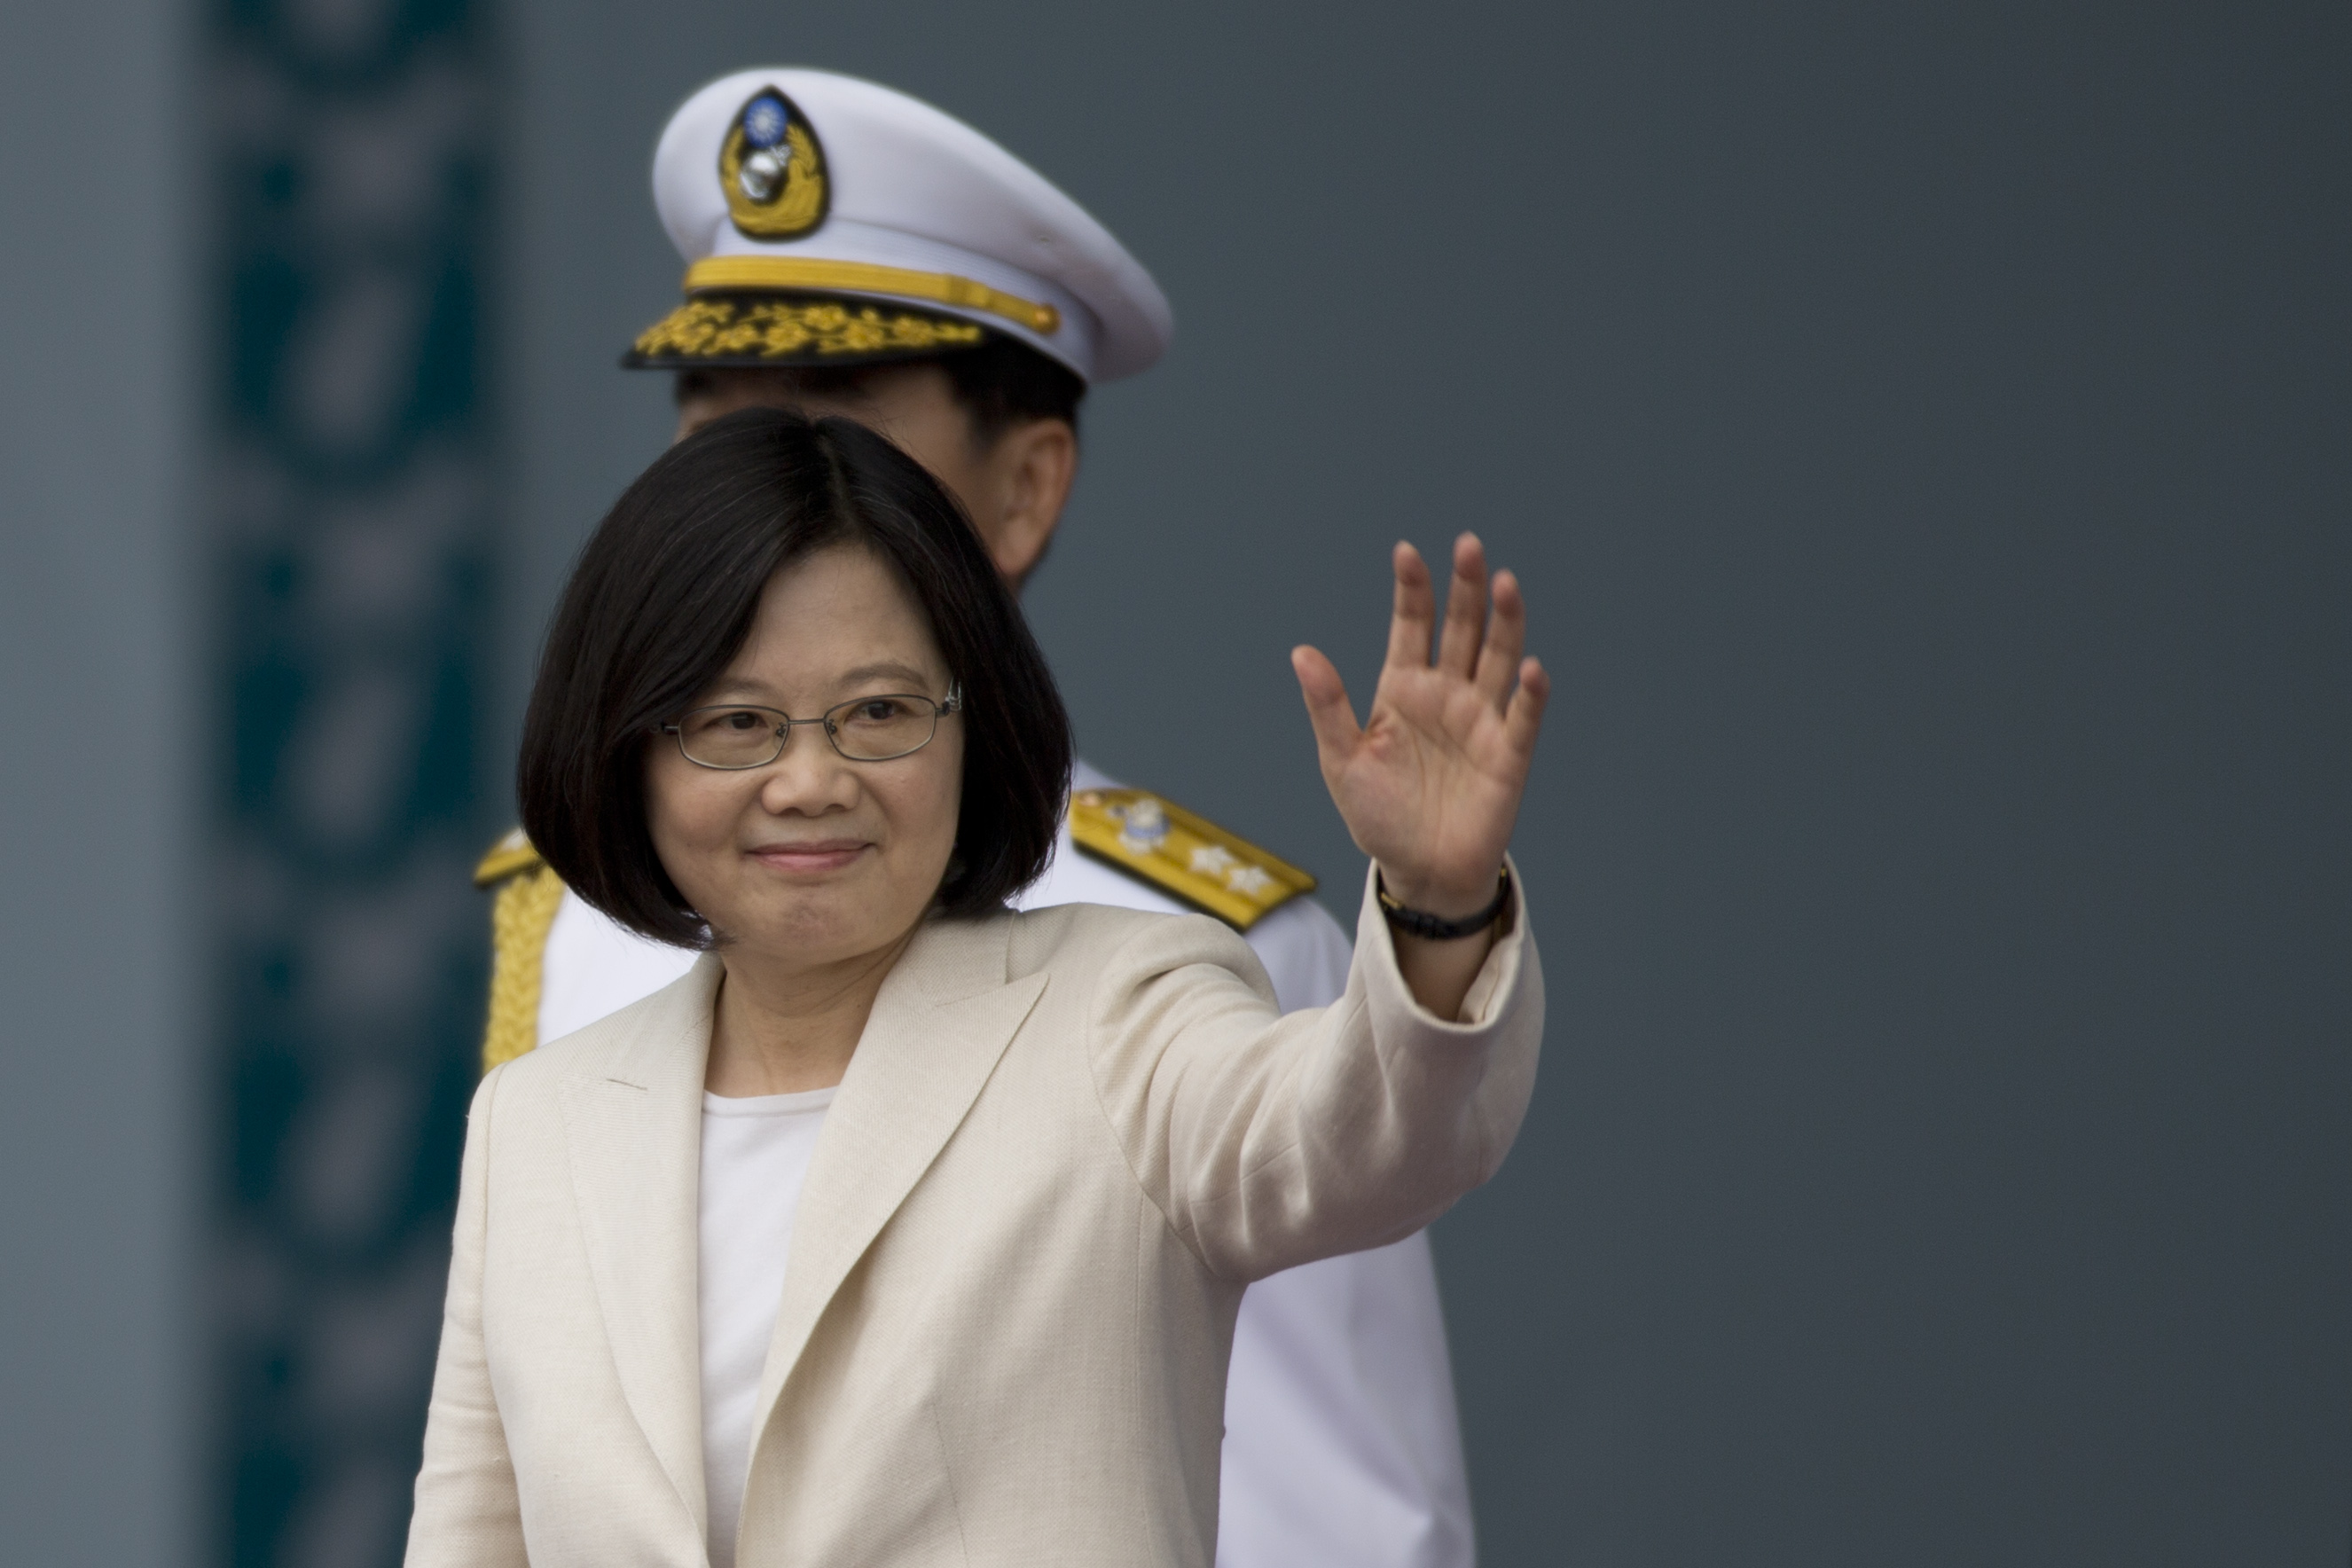 Taiwan President Tsai Ing-wen waves to the supporters at the celebration of the 14th presidential inauguration on May 20 in Taipei, Taiwan. (Ashley Pon&mdash;Getty Images)